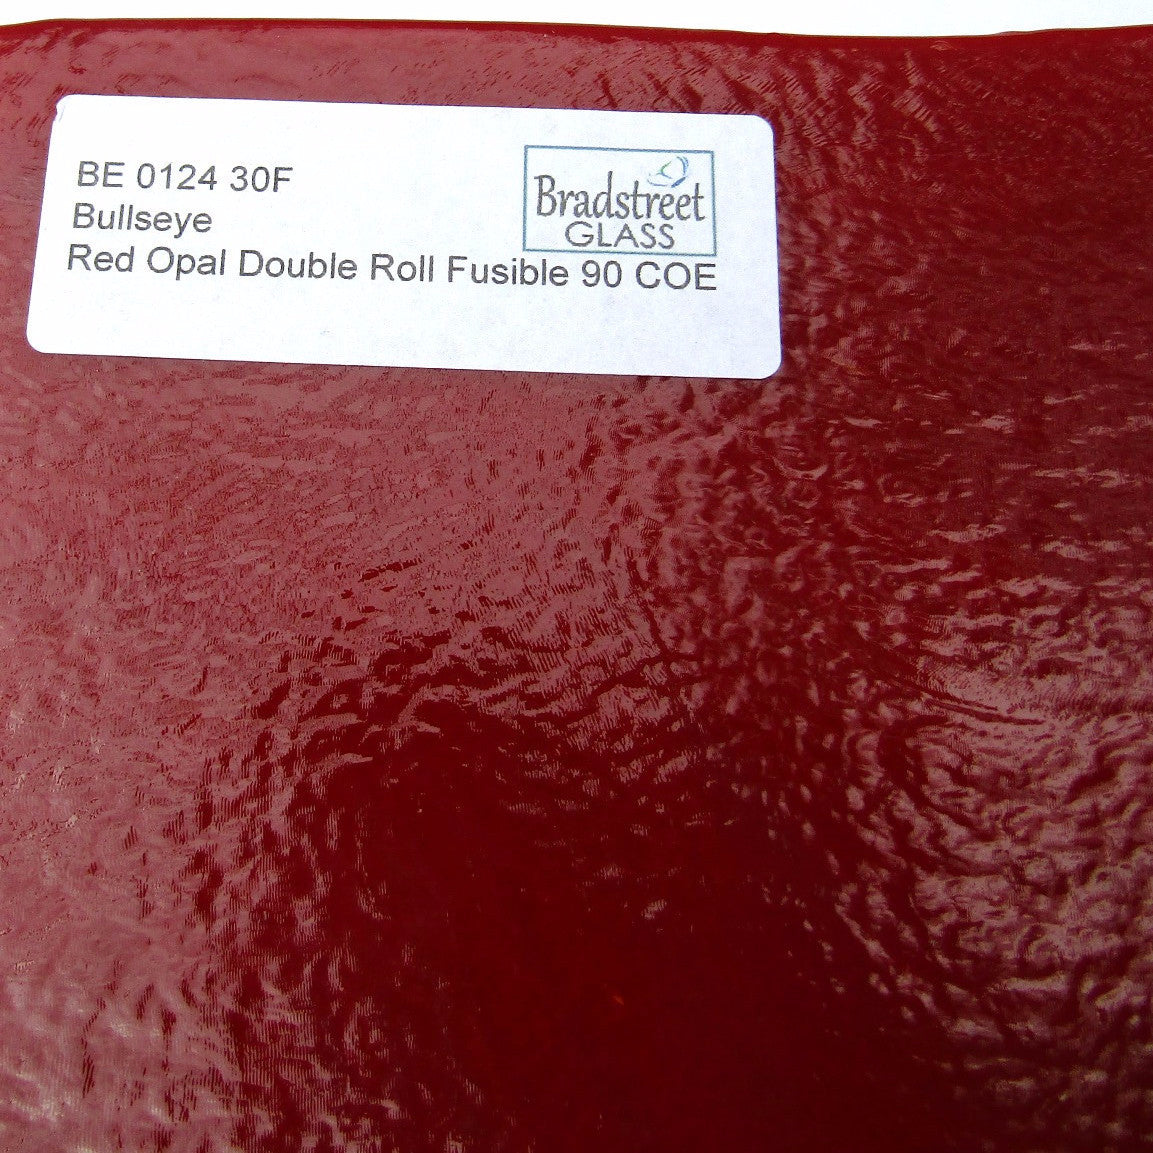 Bullseye Red Opal Double Rolled Fusible 90 COE Stained Glass Sheet BE 0124 30F